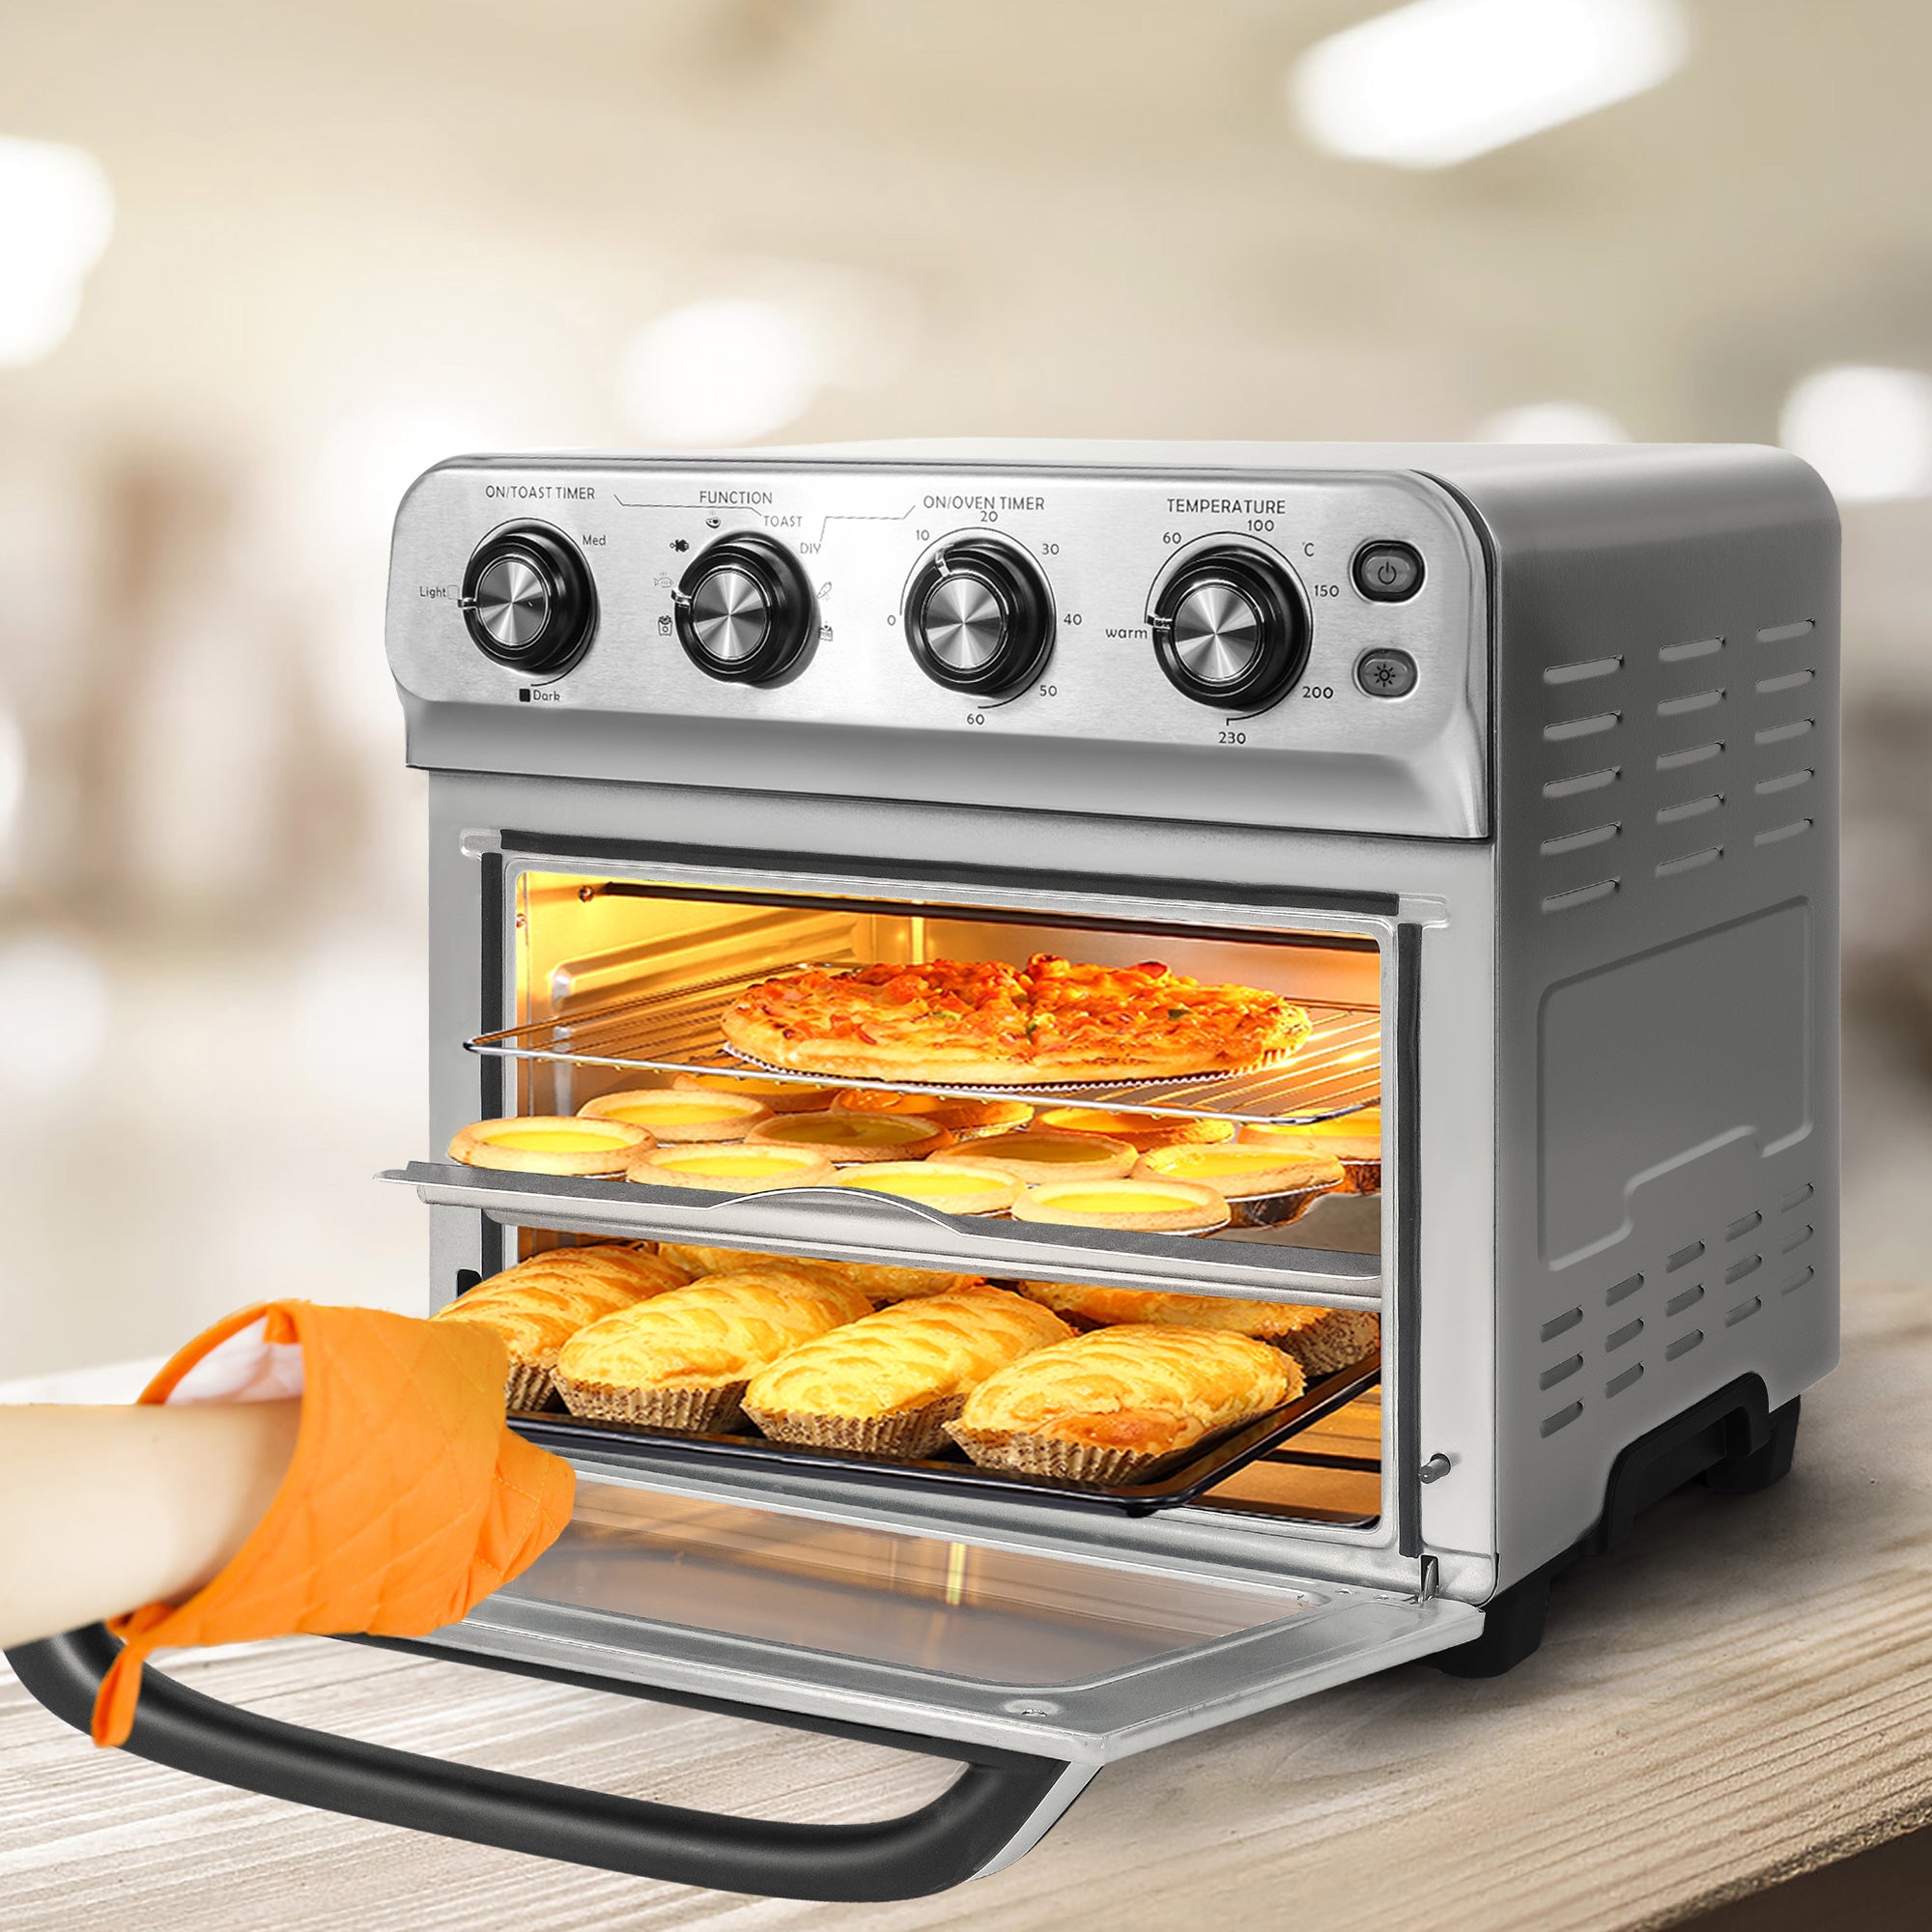 Air Fryer Toaster Oven 24QT Airfryer 8 Fuctions Knob Control, Fits 12" Pizza, 6 Slice Toast, Countertop Convection Oven